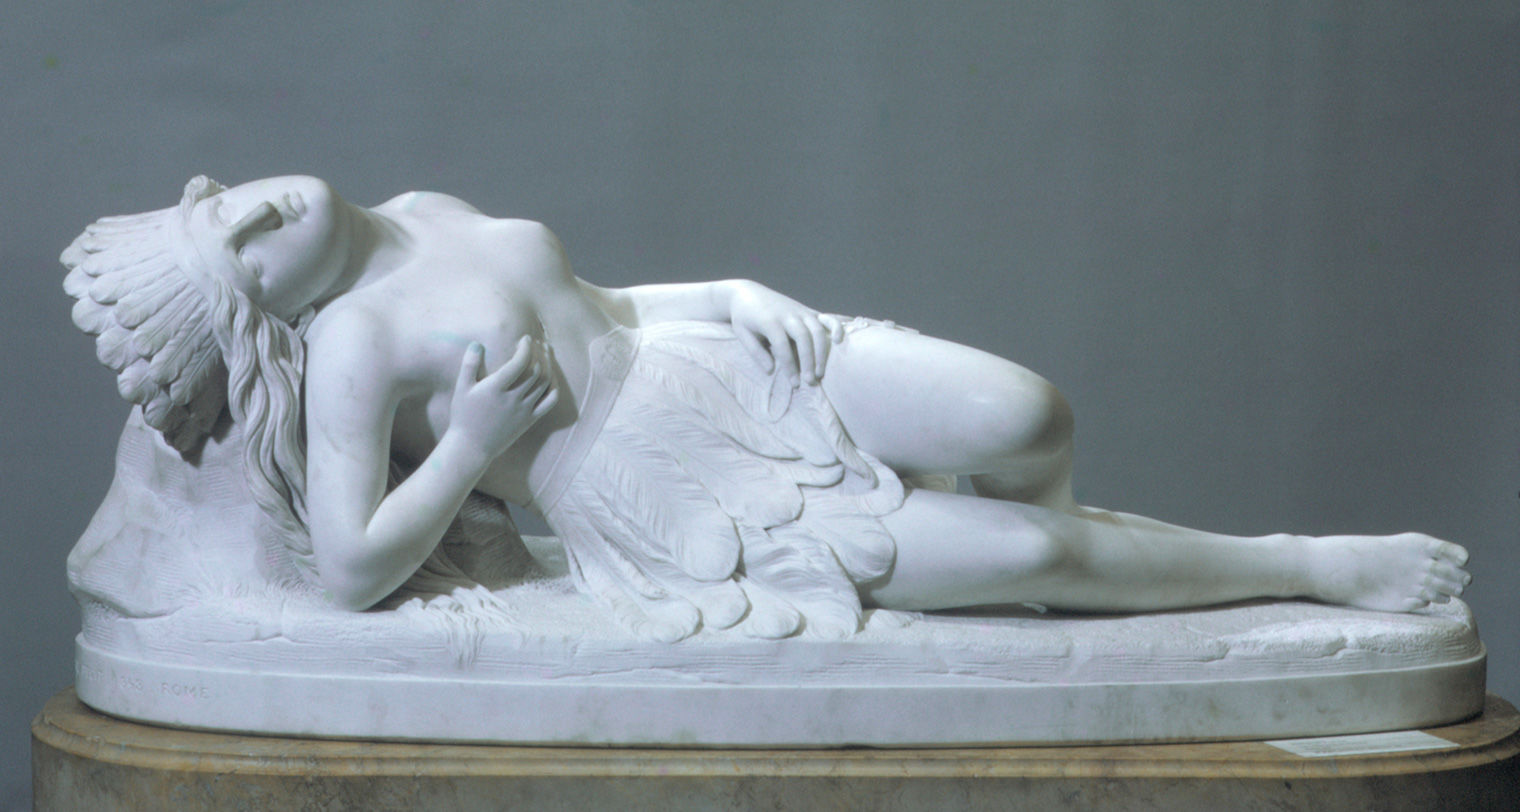 A white marble sculpture of a reclining, bare-chested woman wearing a feathered headdress and skirt, and holding a cross